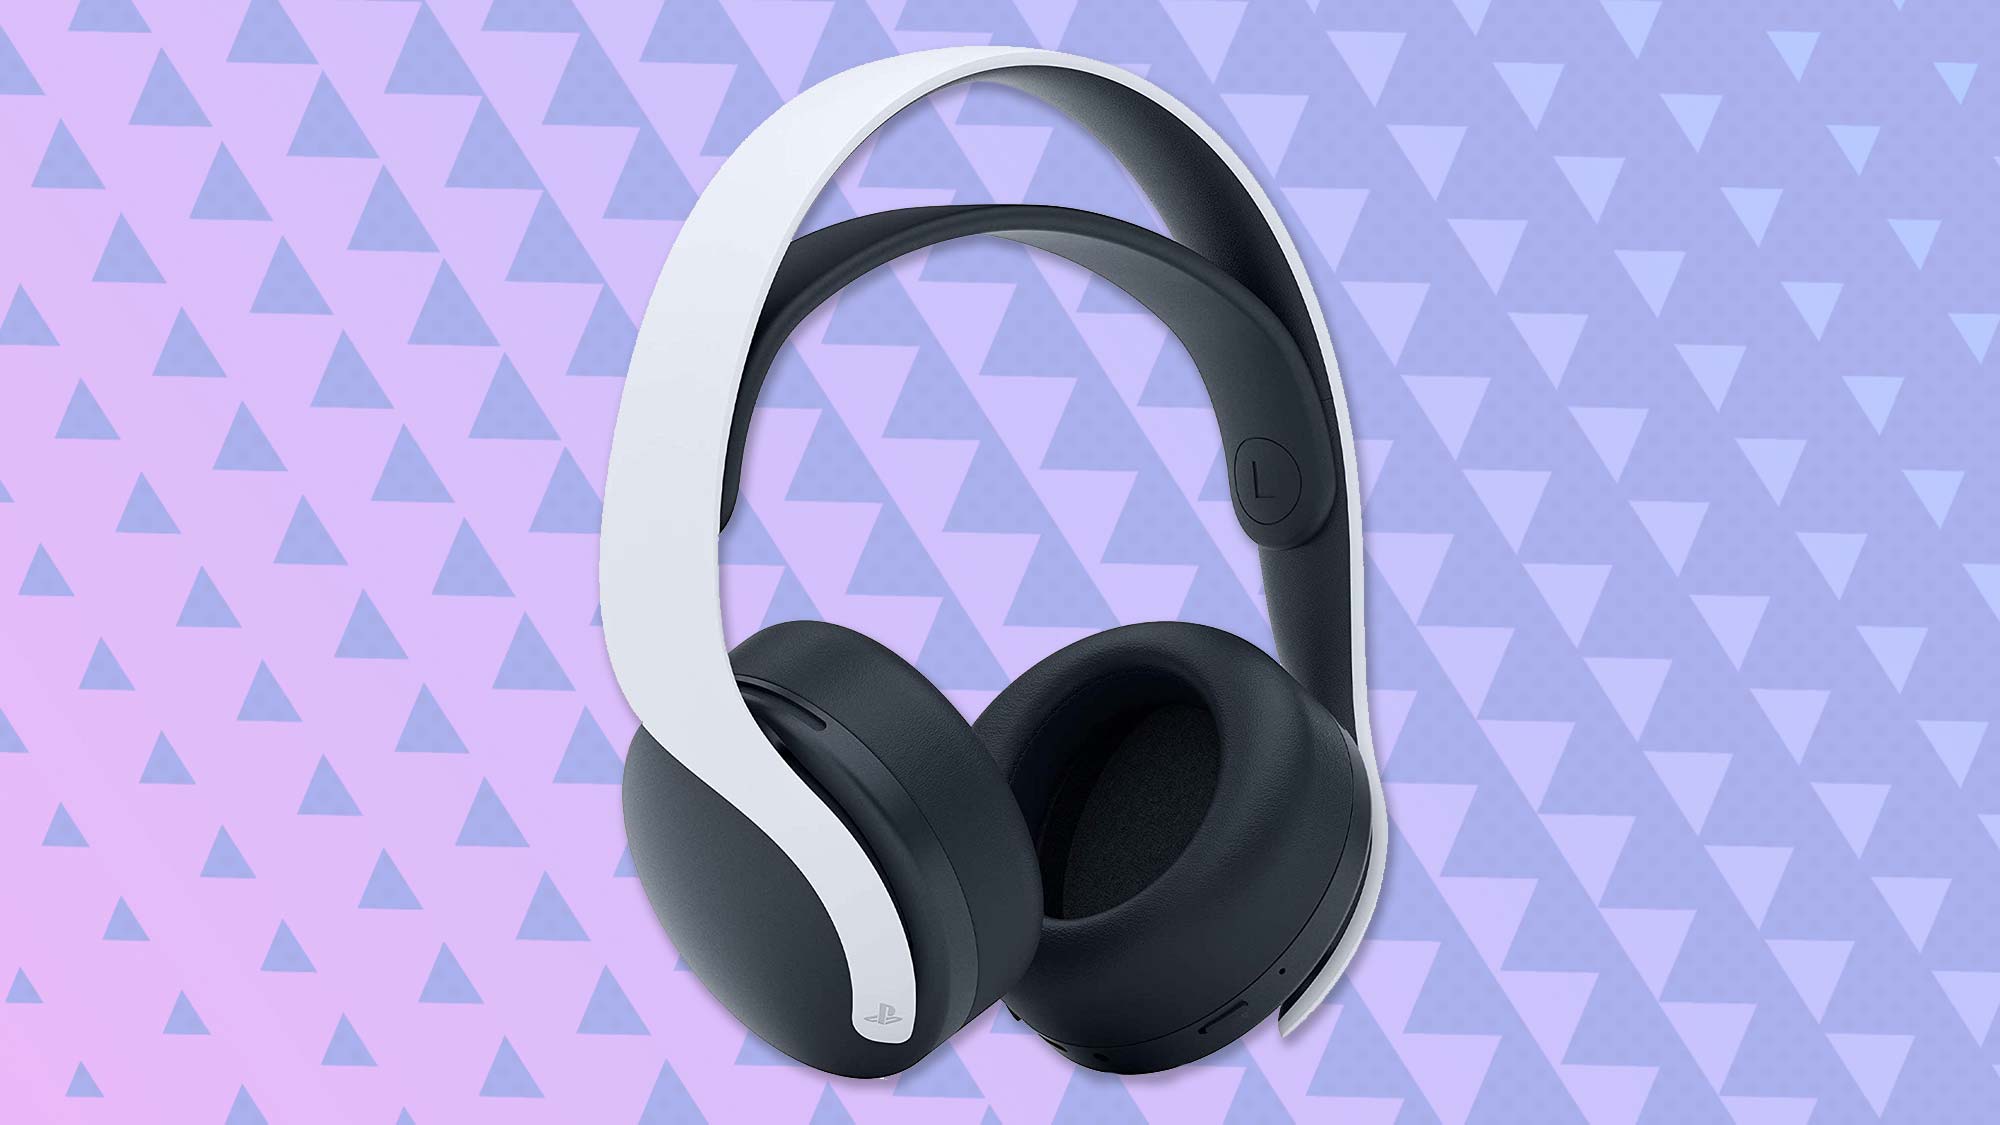 Best headsets for PS5: Sony Pulse 3D Wireless Headset